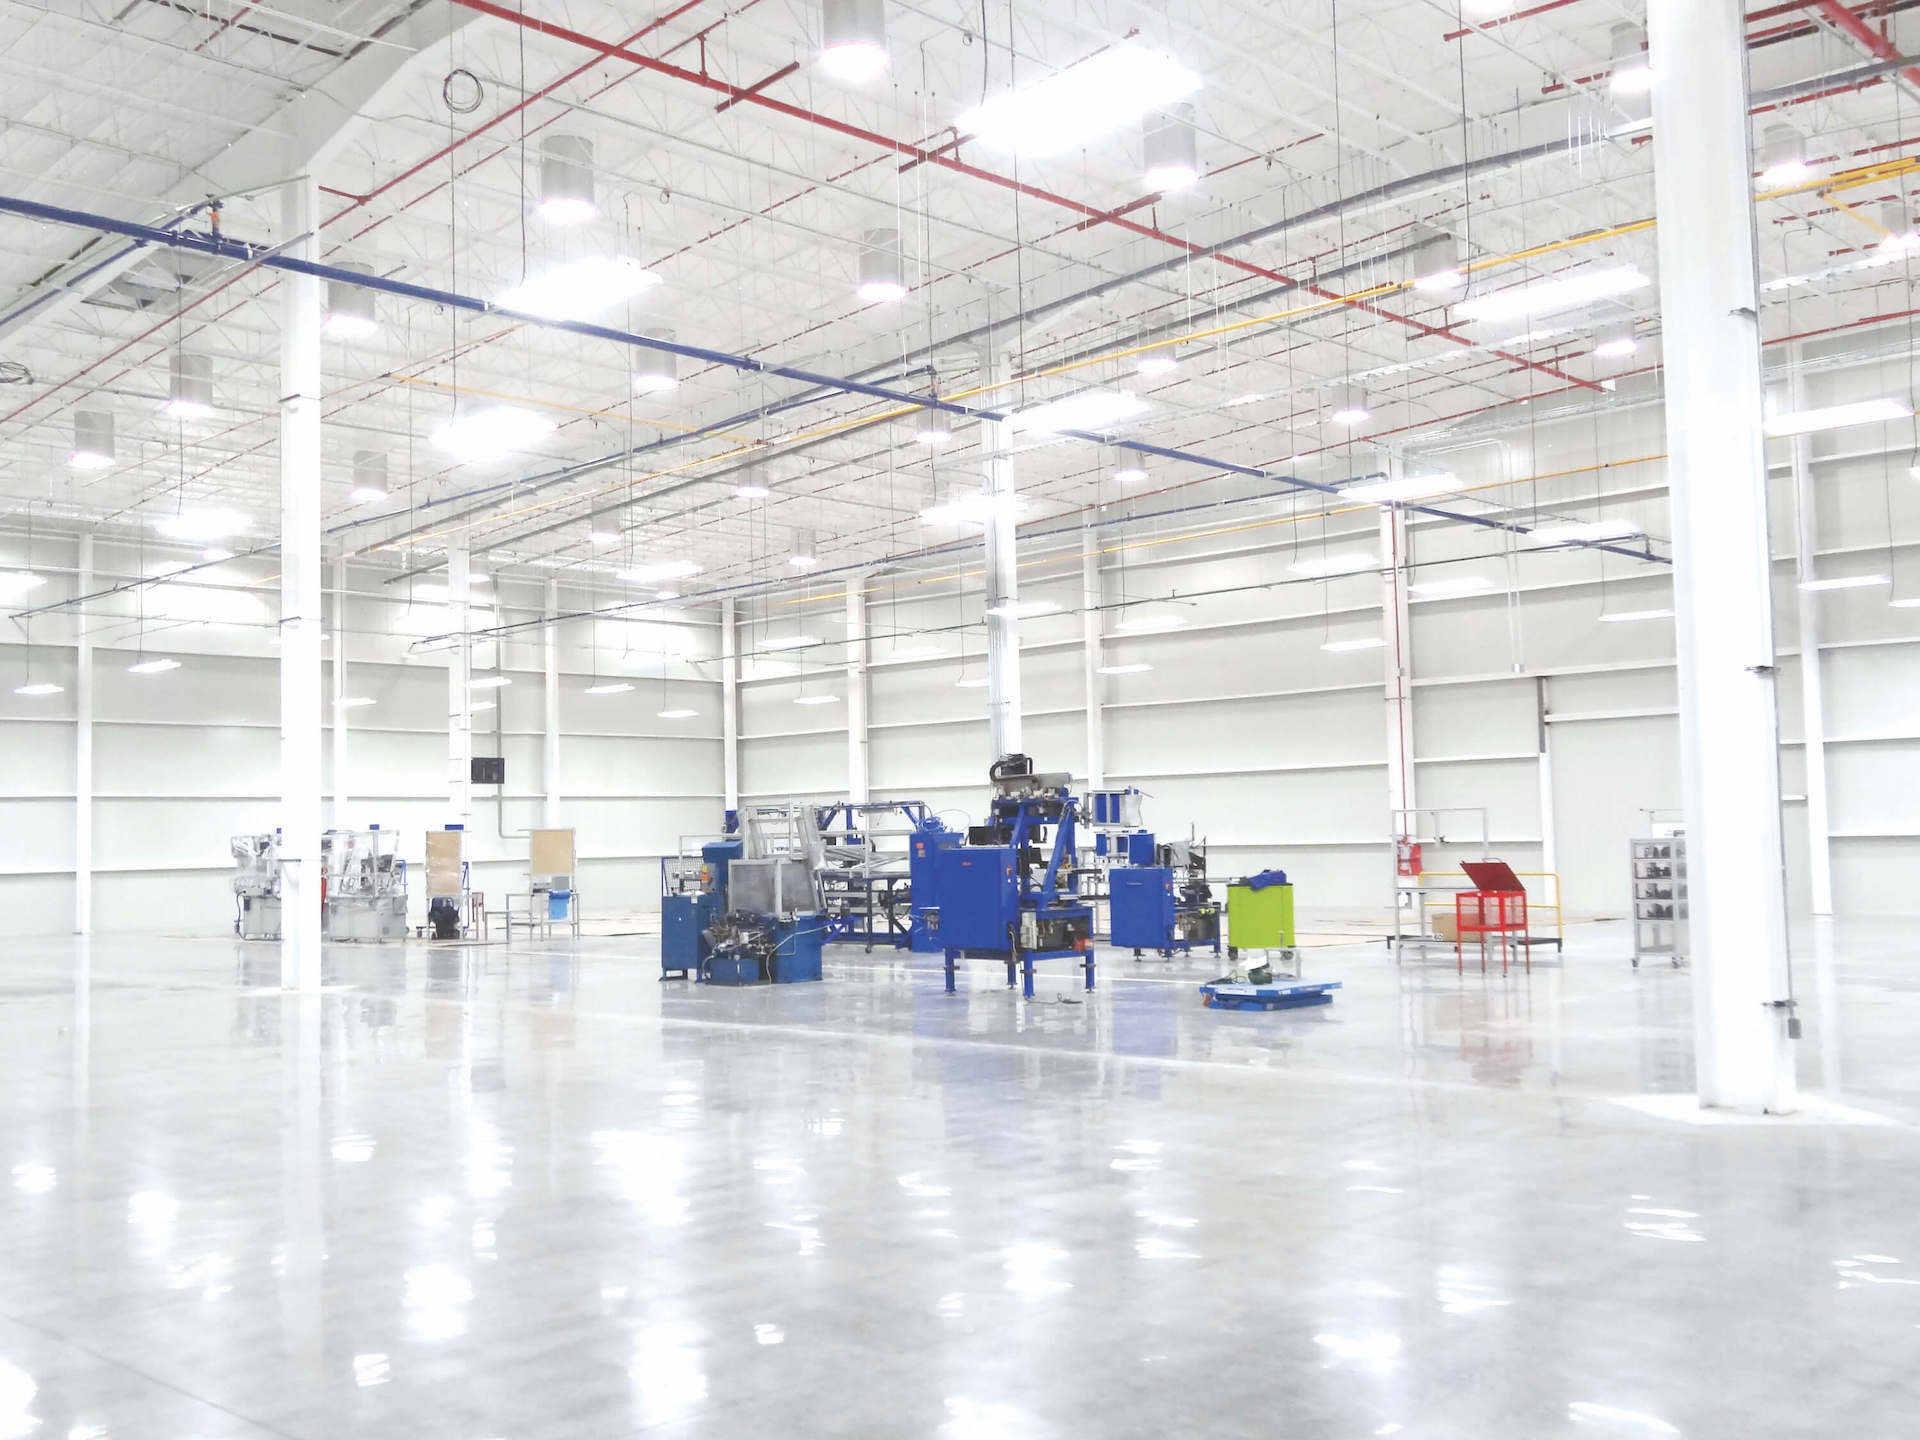 Large and bright factory interior, recently completed